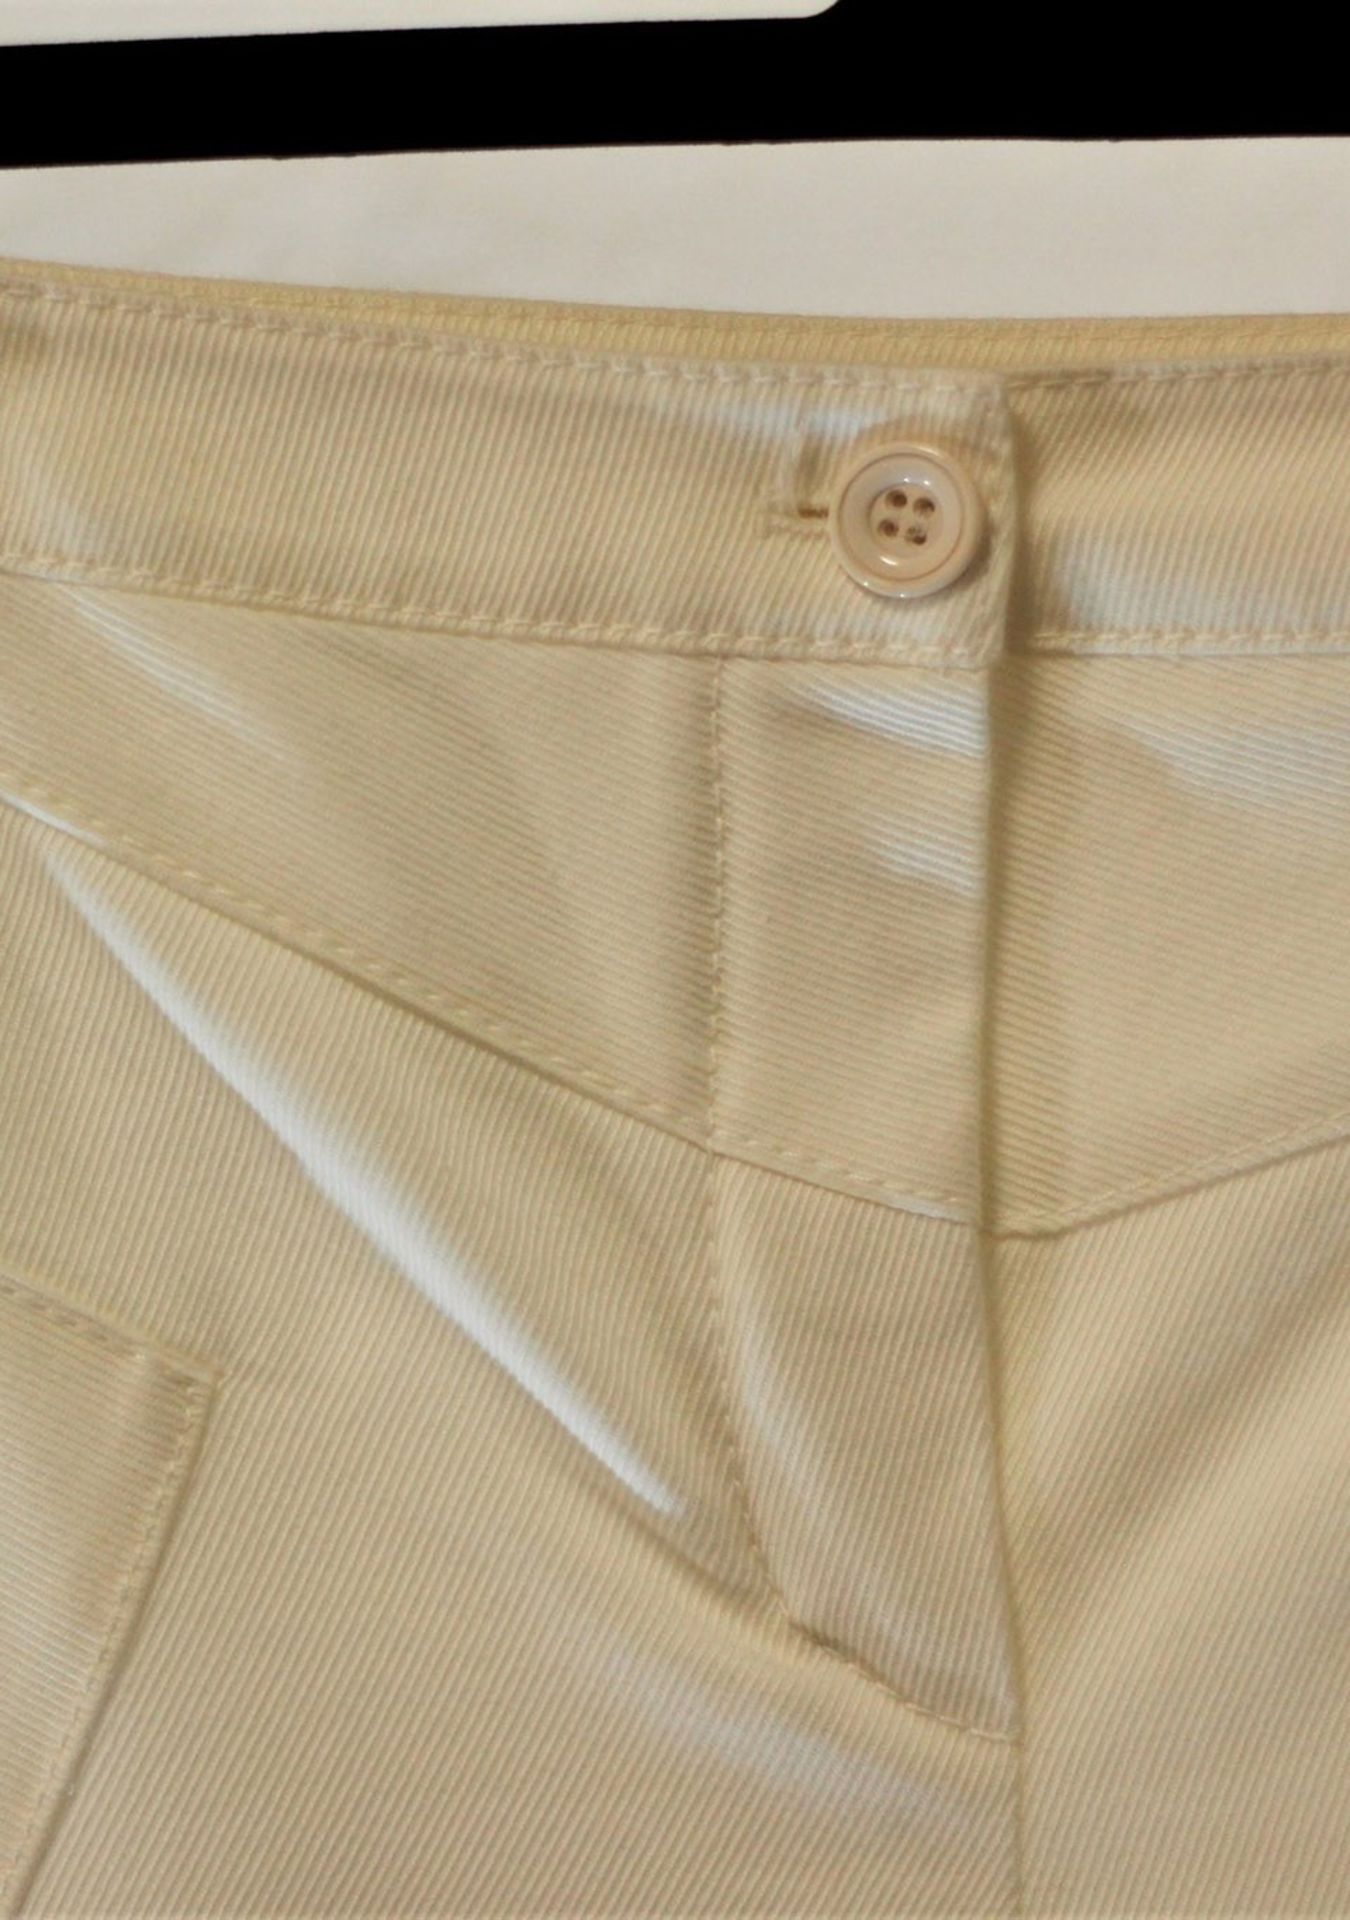 1 x Valentino Cream Trousers - Size: 10 - Material: 98% Cotton, 2% Elastane. Lining 100% Polyester - - Image 5 of 5